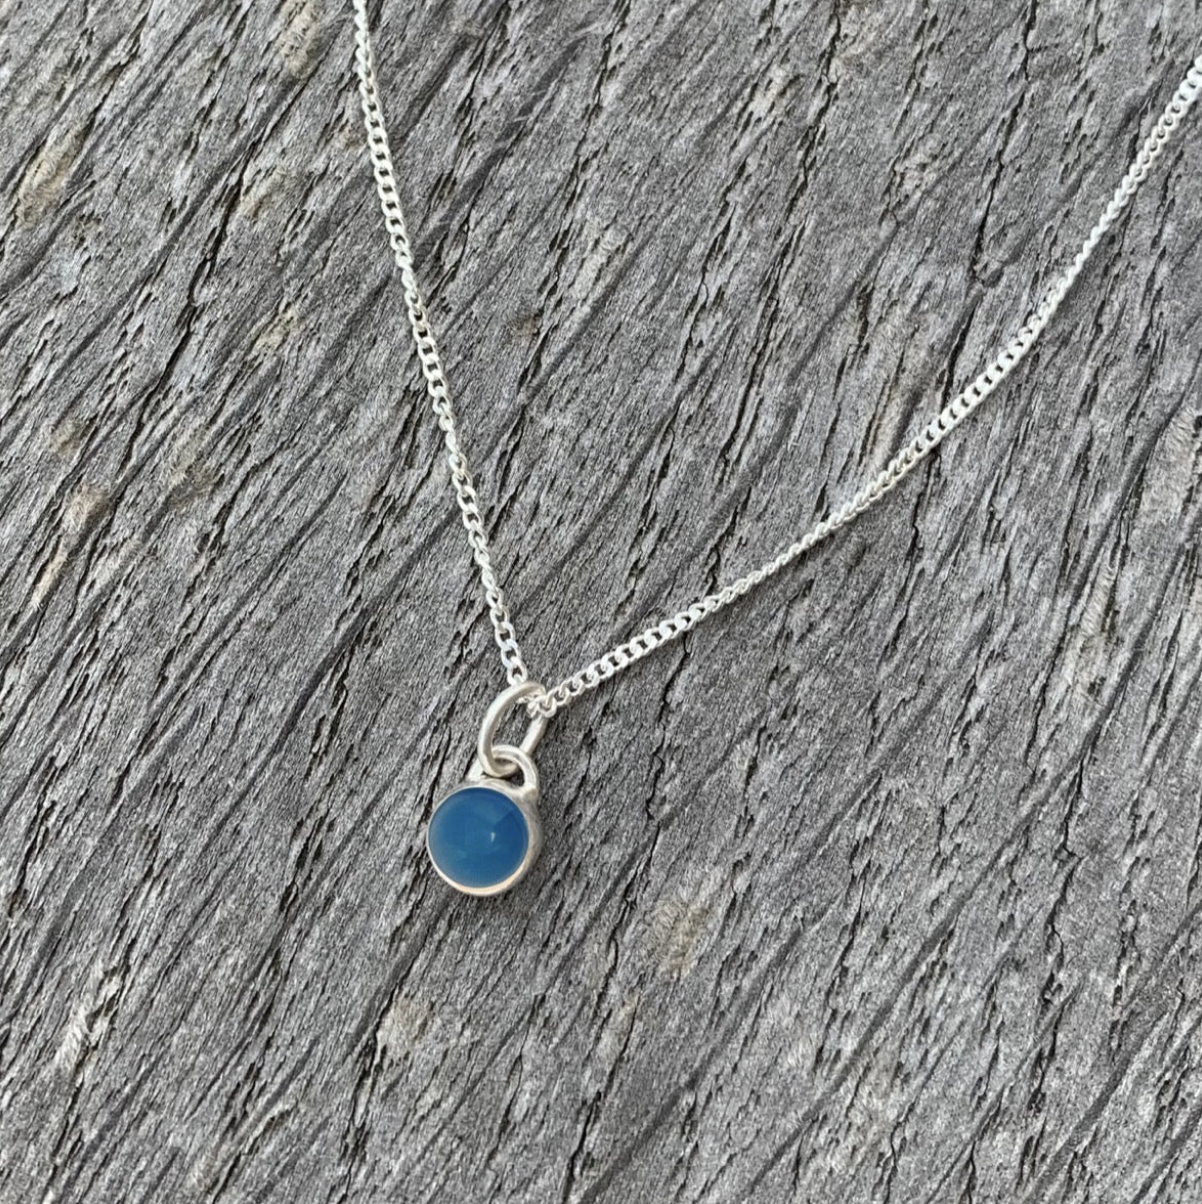 A blue agate and sterling silver charm necklace.